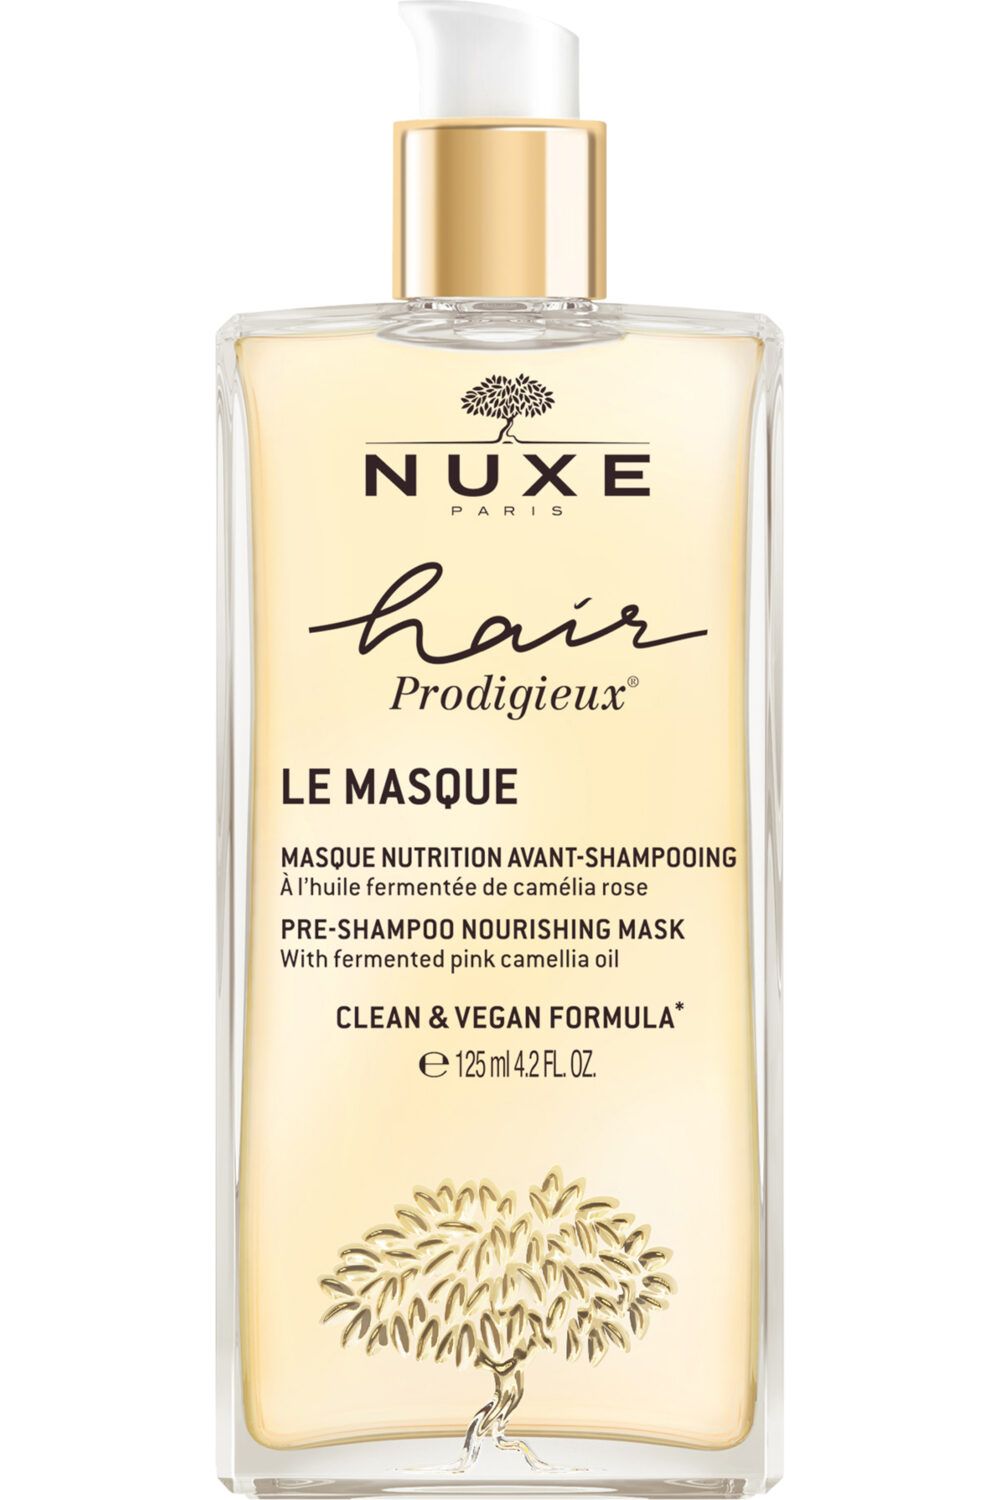 Nuxe - Masque nutrition avant-shampoing Hair Prodigieux®